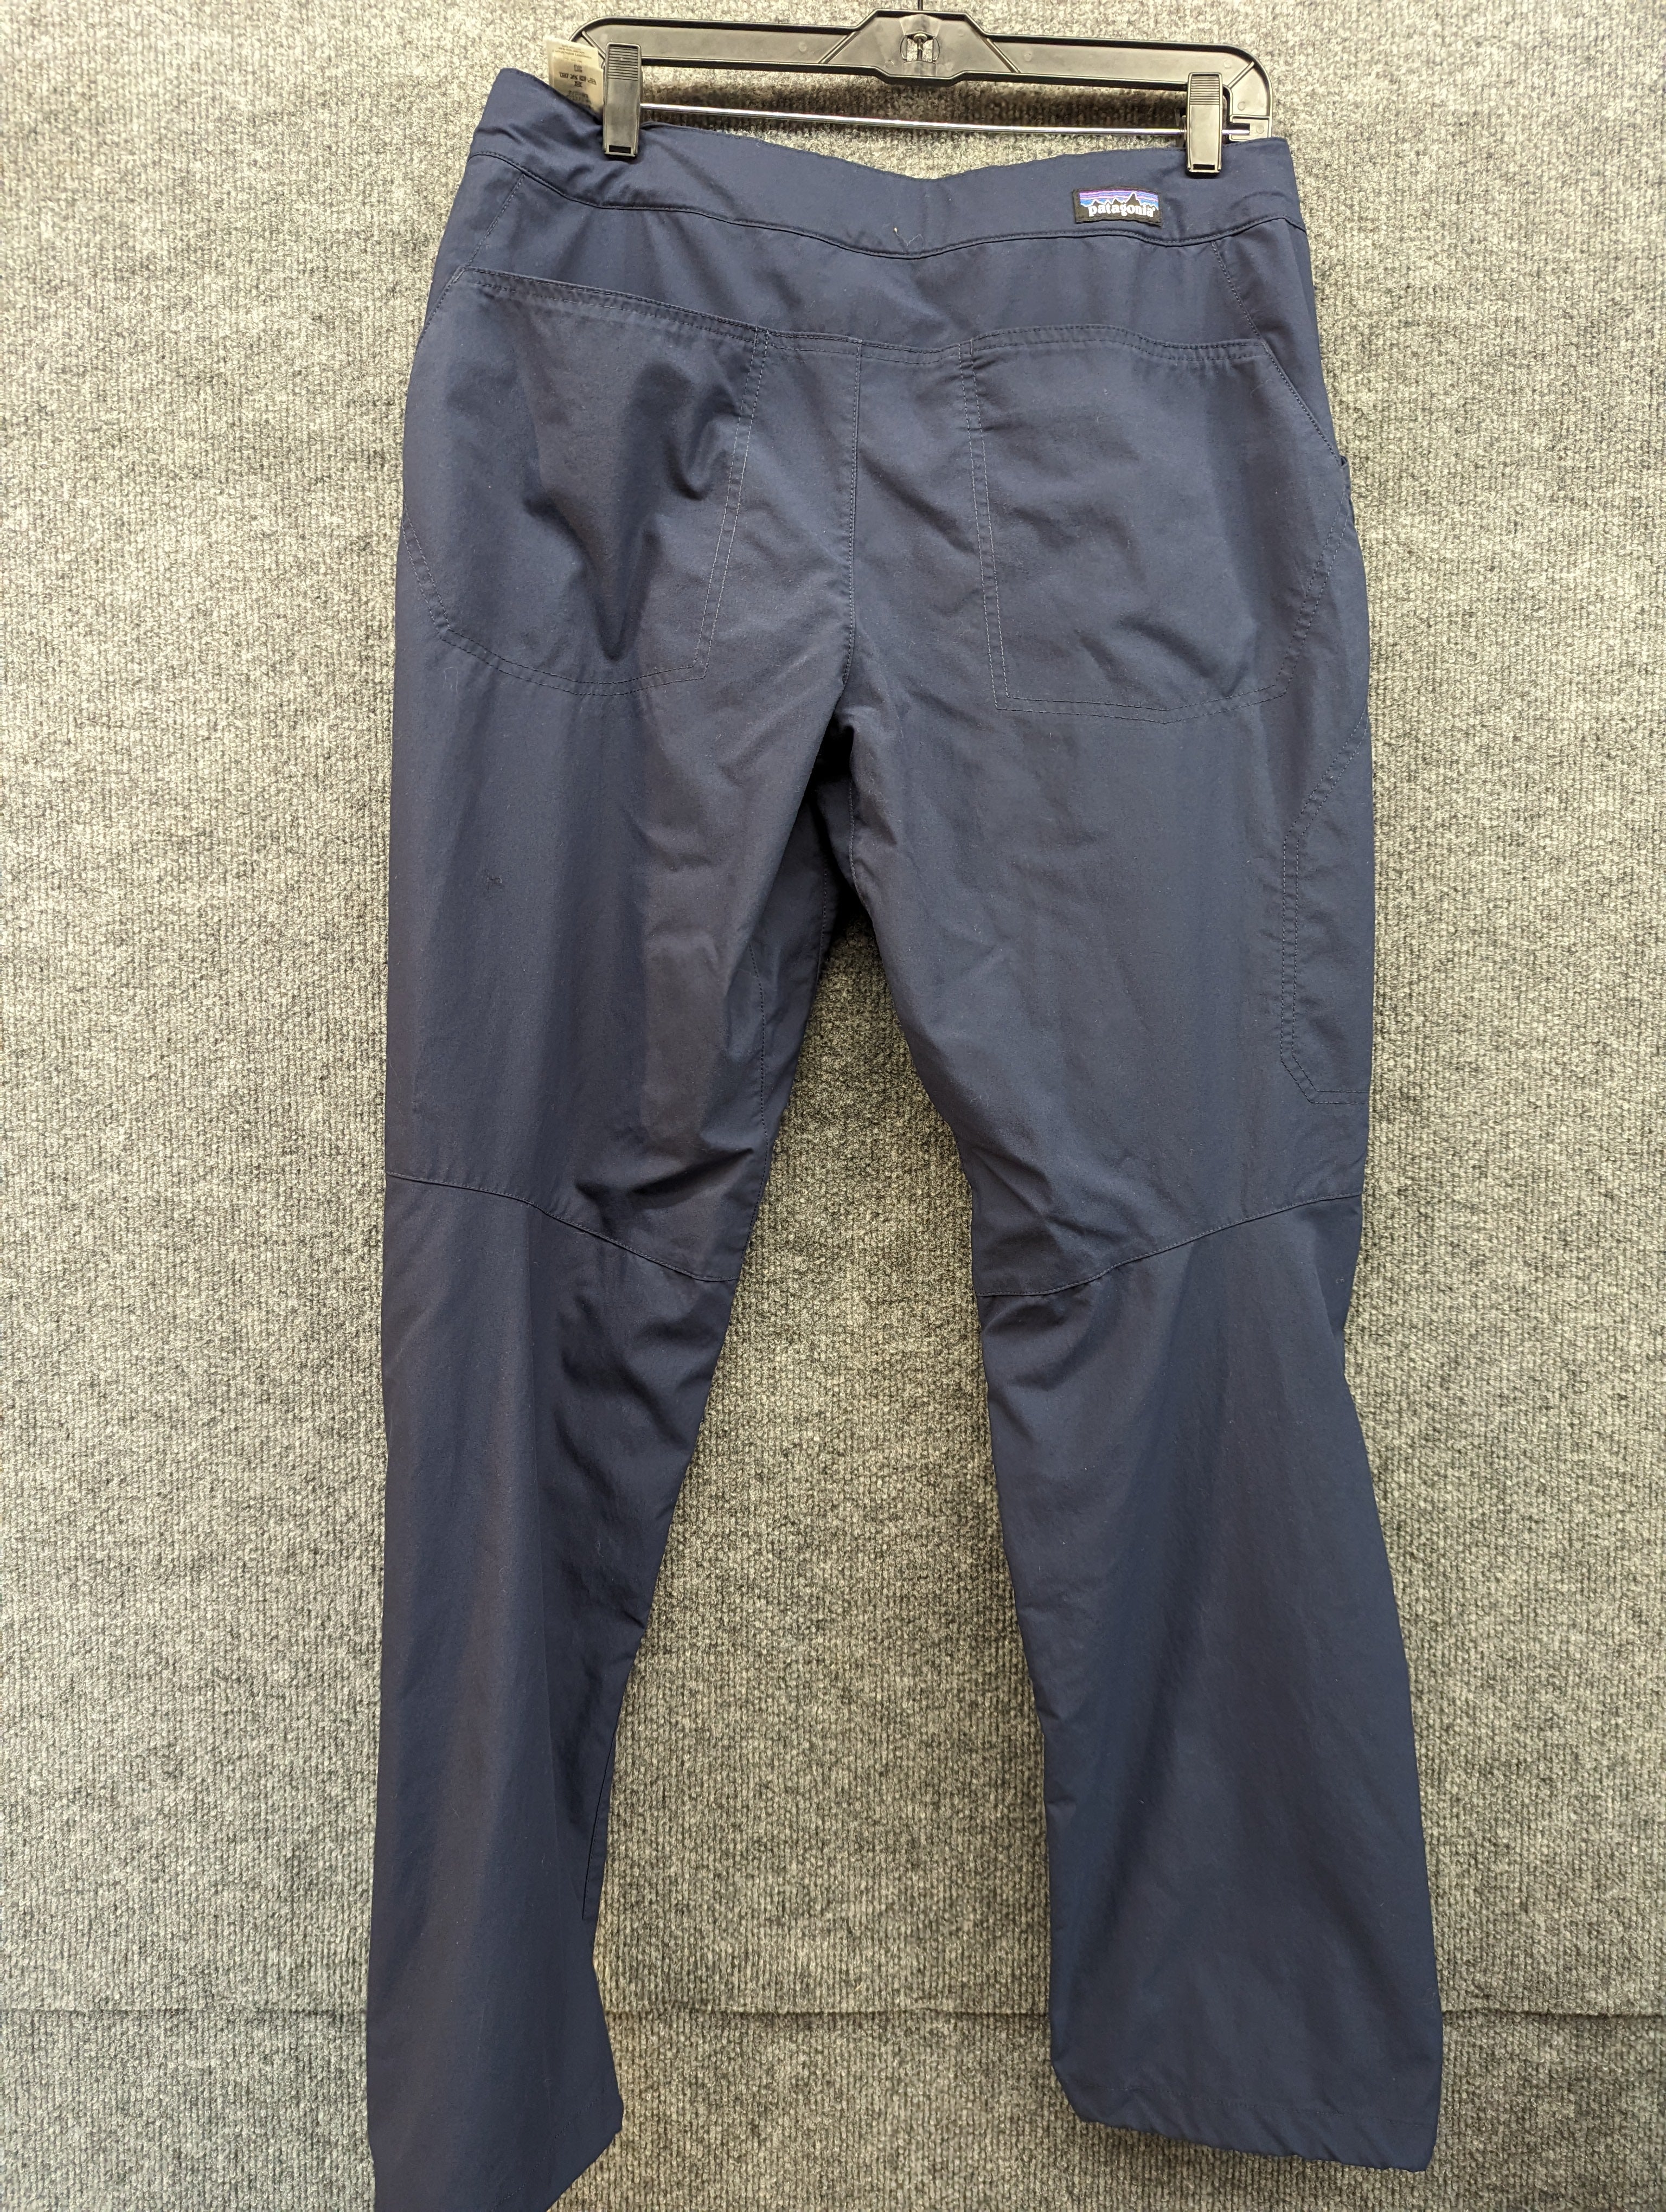 Tall Size Pants 34 Inch Inseam | Clothes design, Tall sizes, Inseam